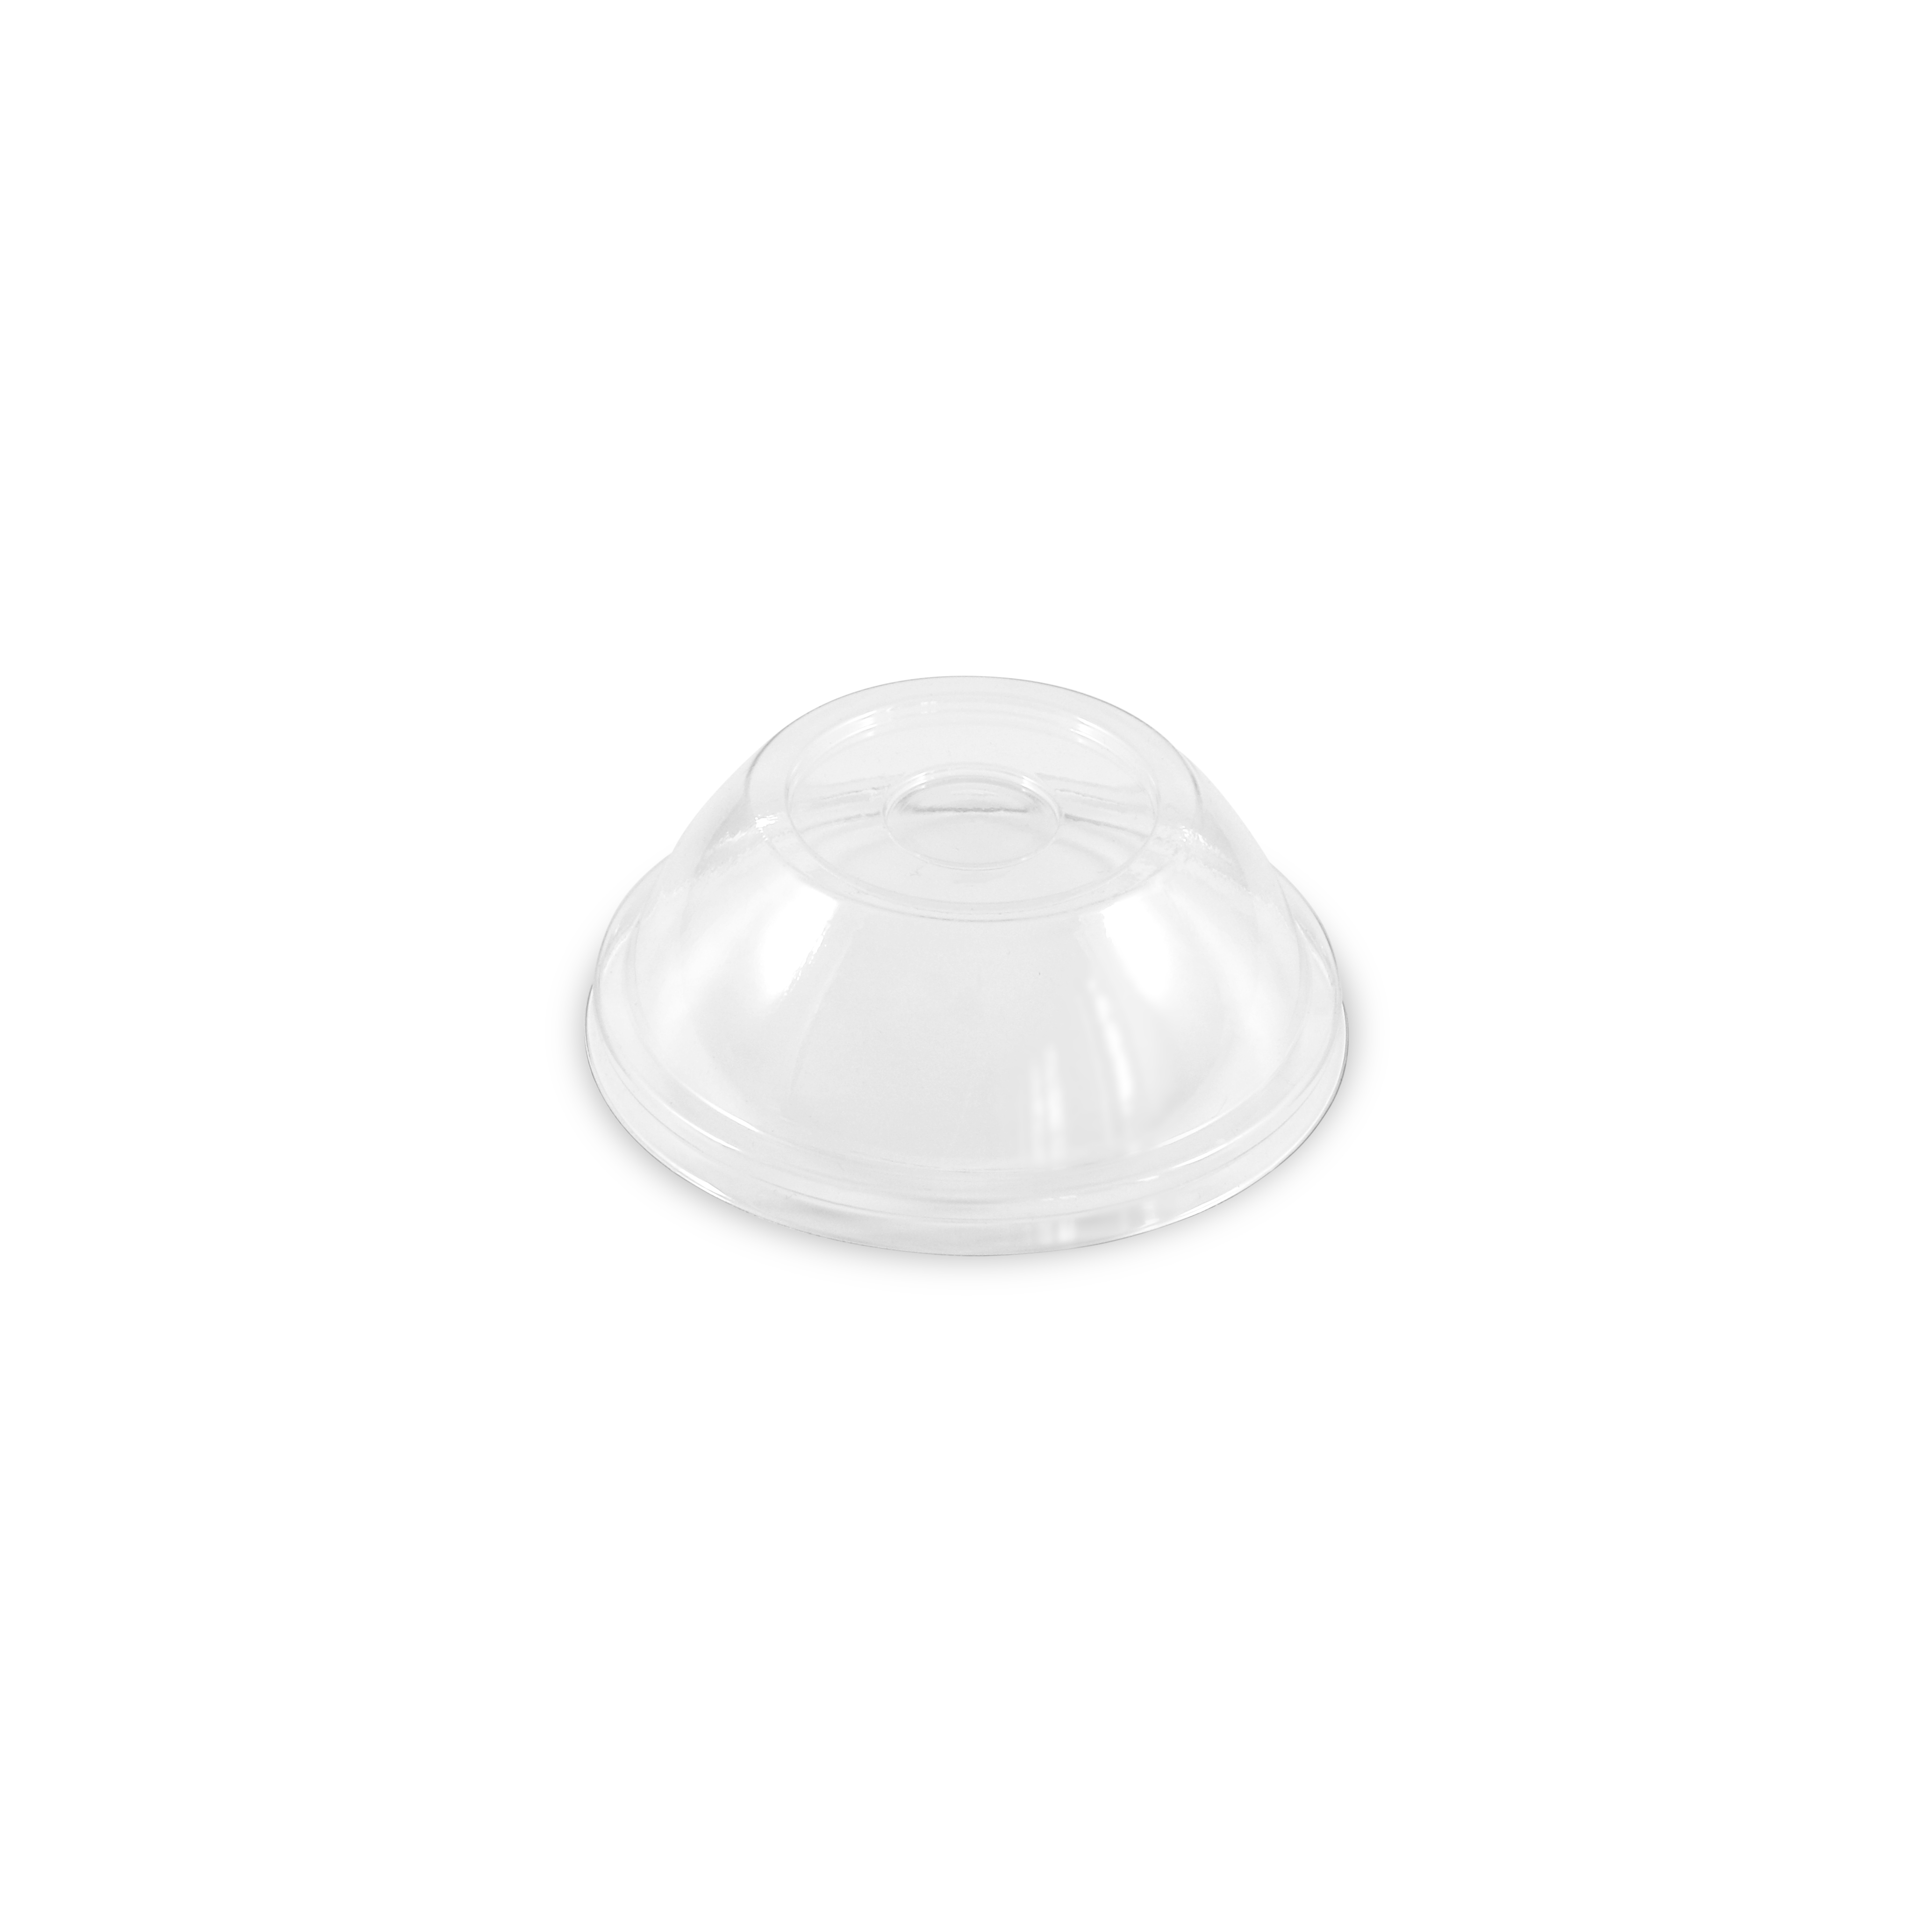 https://www.berryglobal.com/-/media/Berry/Images/Products/Berry-Global/98mm-Clear-PET-Dome-Lid-13662495/98mm_pet_dome_lid_13662495.ashx